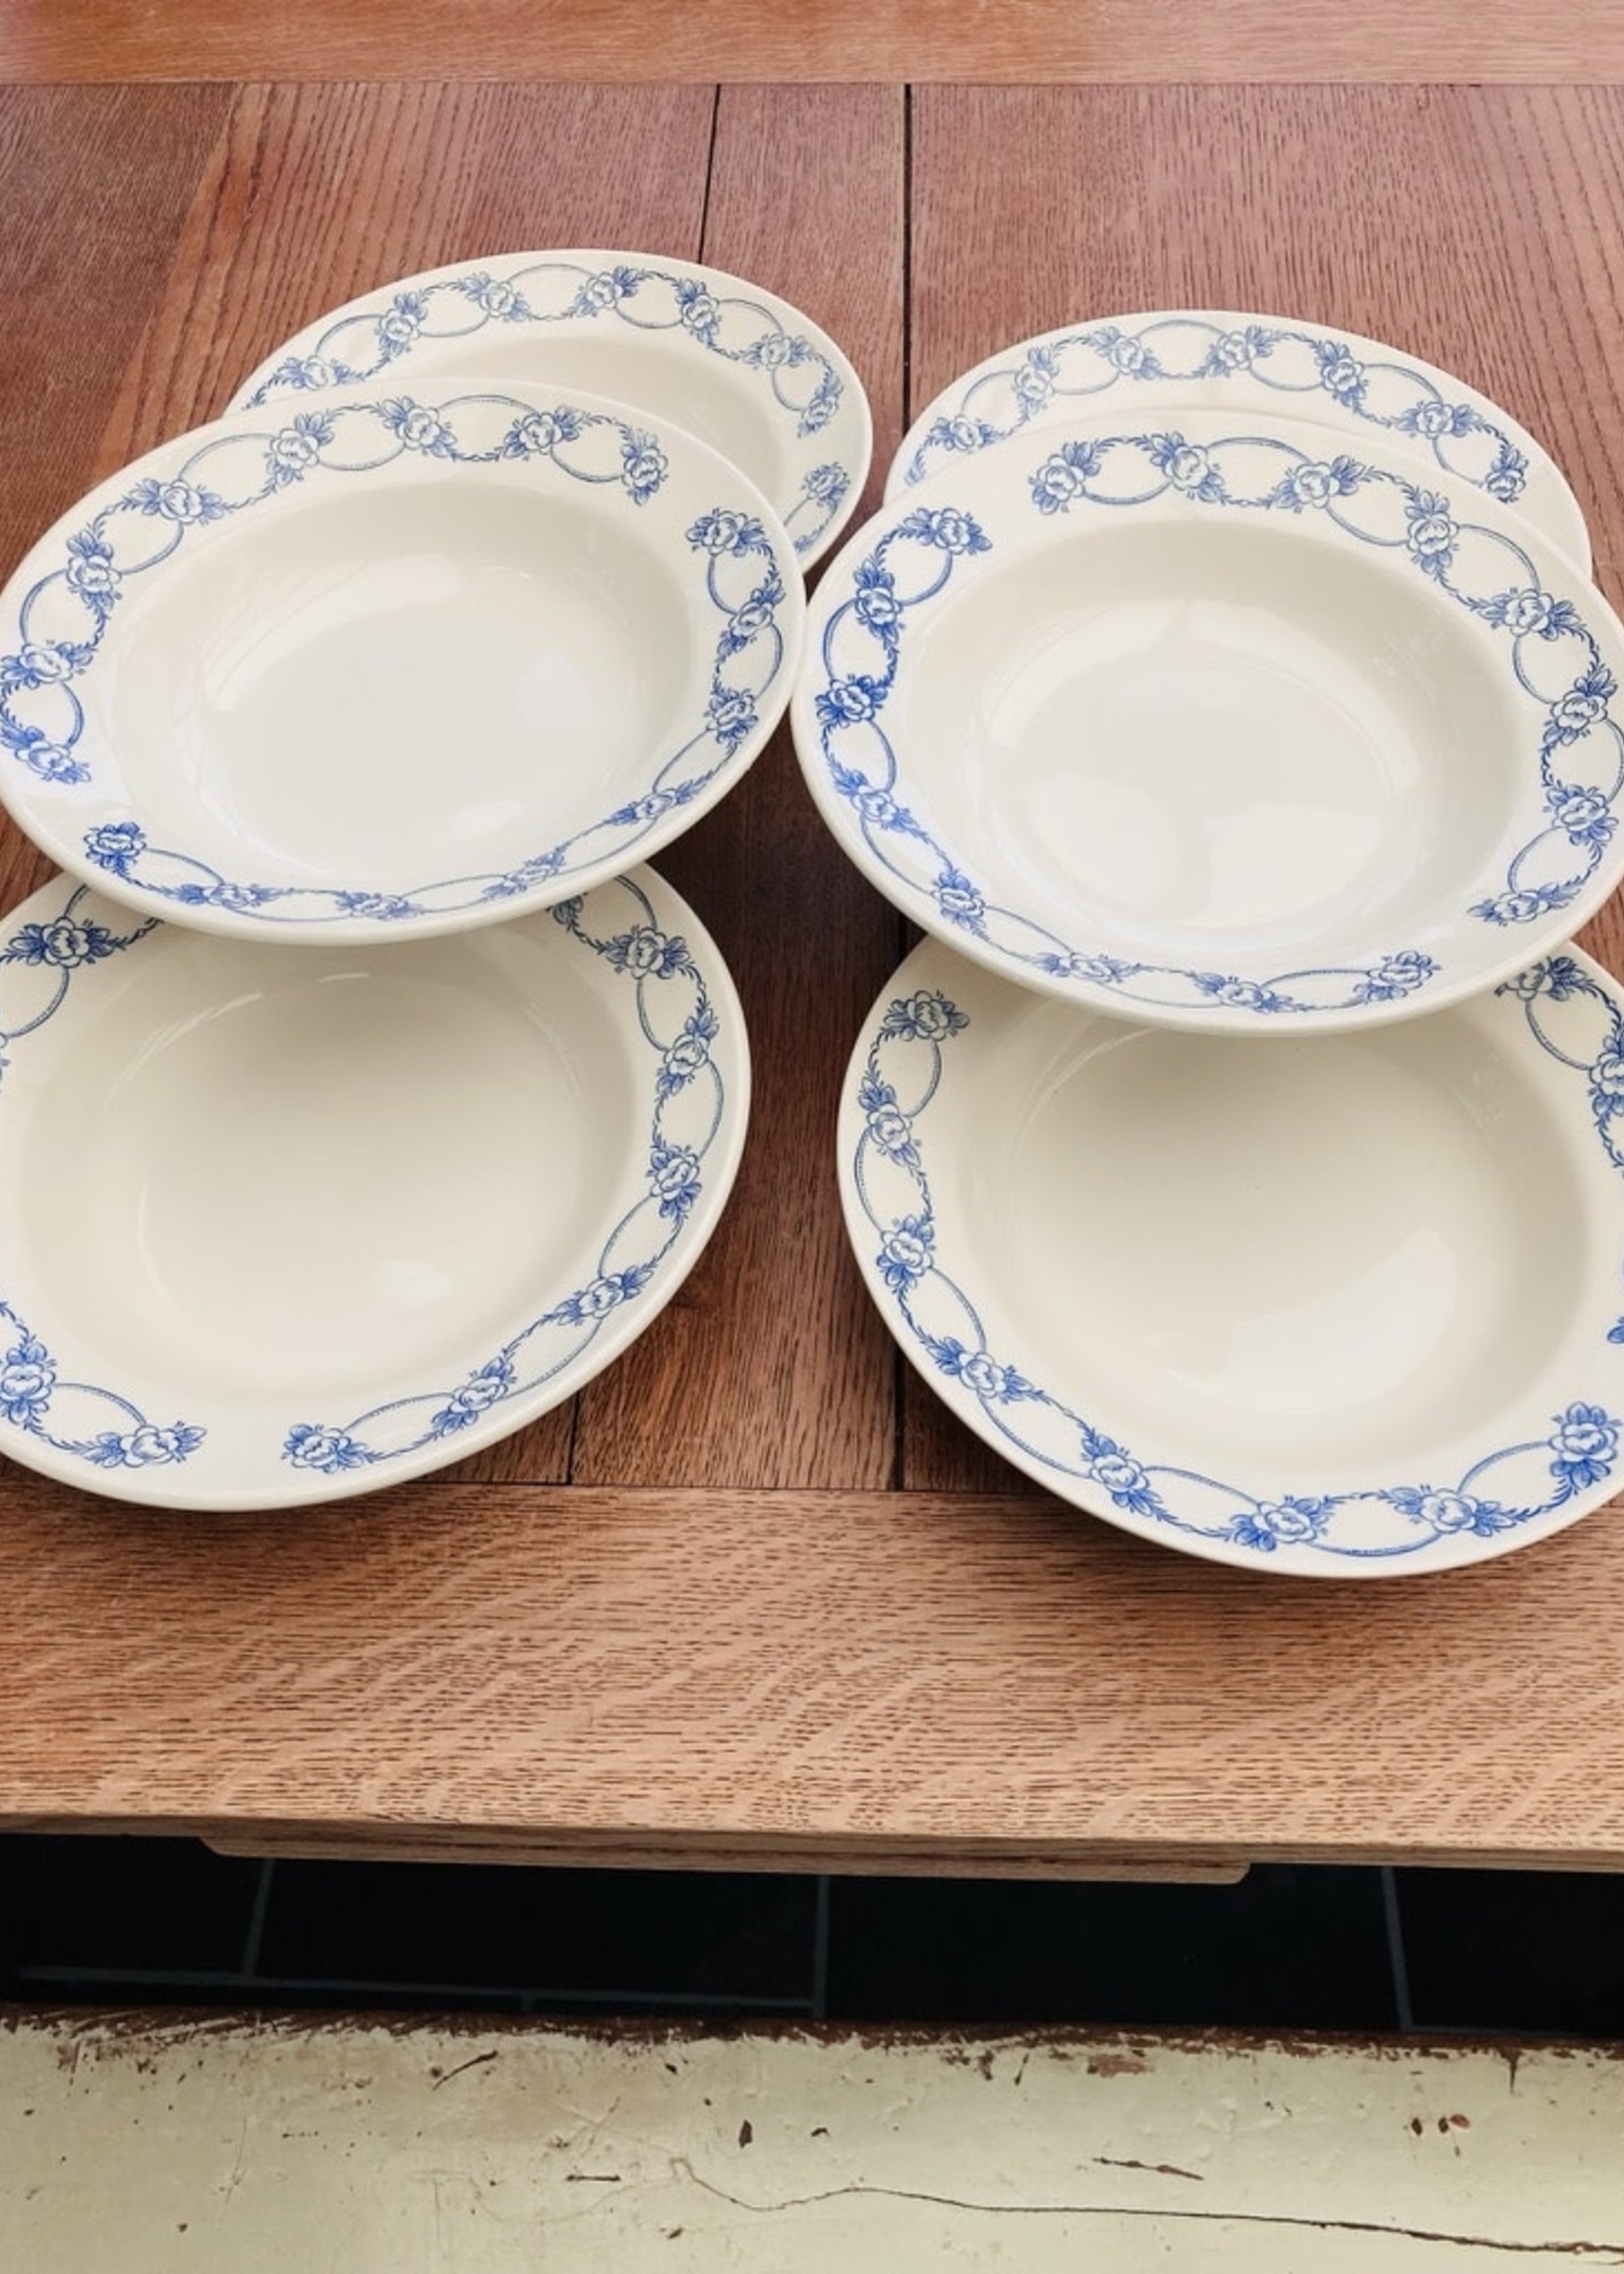 Deep plates With blue flowers on border - No brand